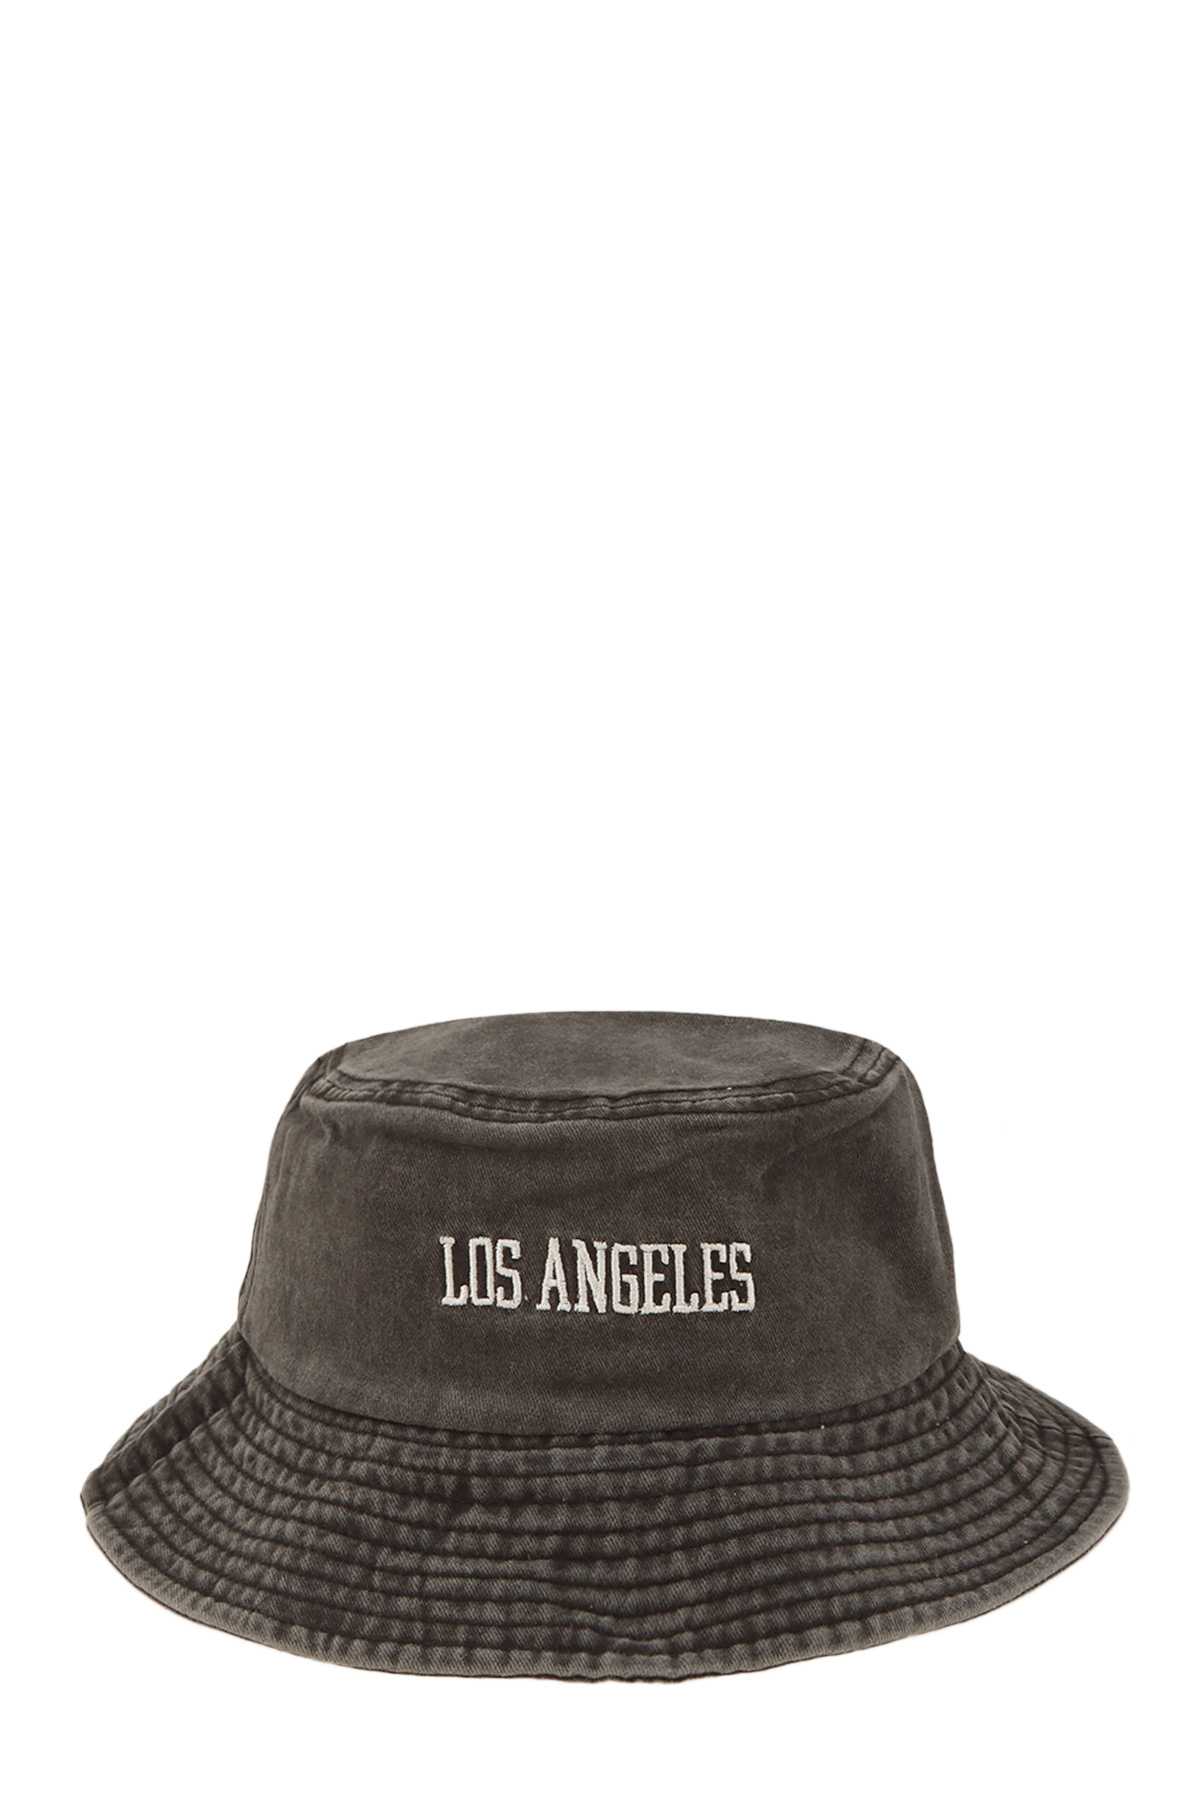 LOS ANGELES Embroidery Pigment Bucket Hat